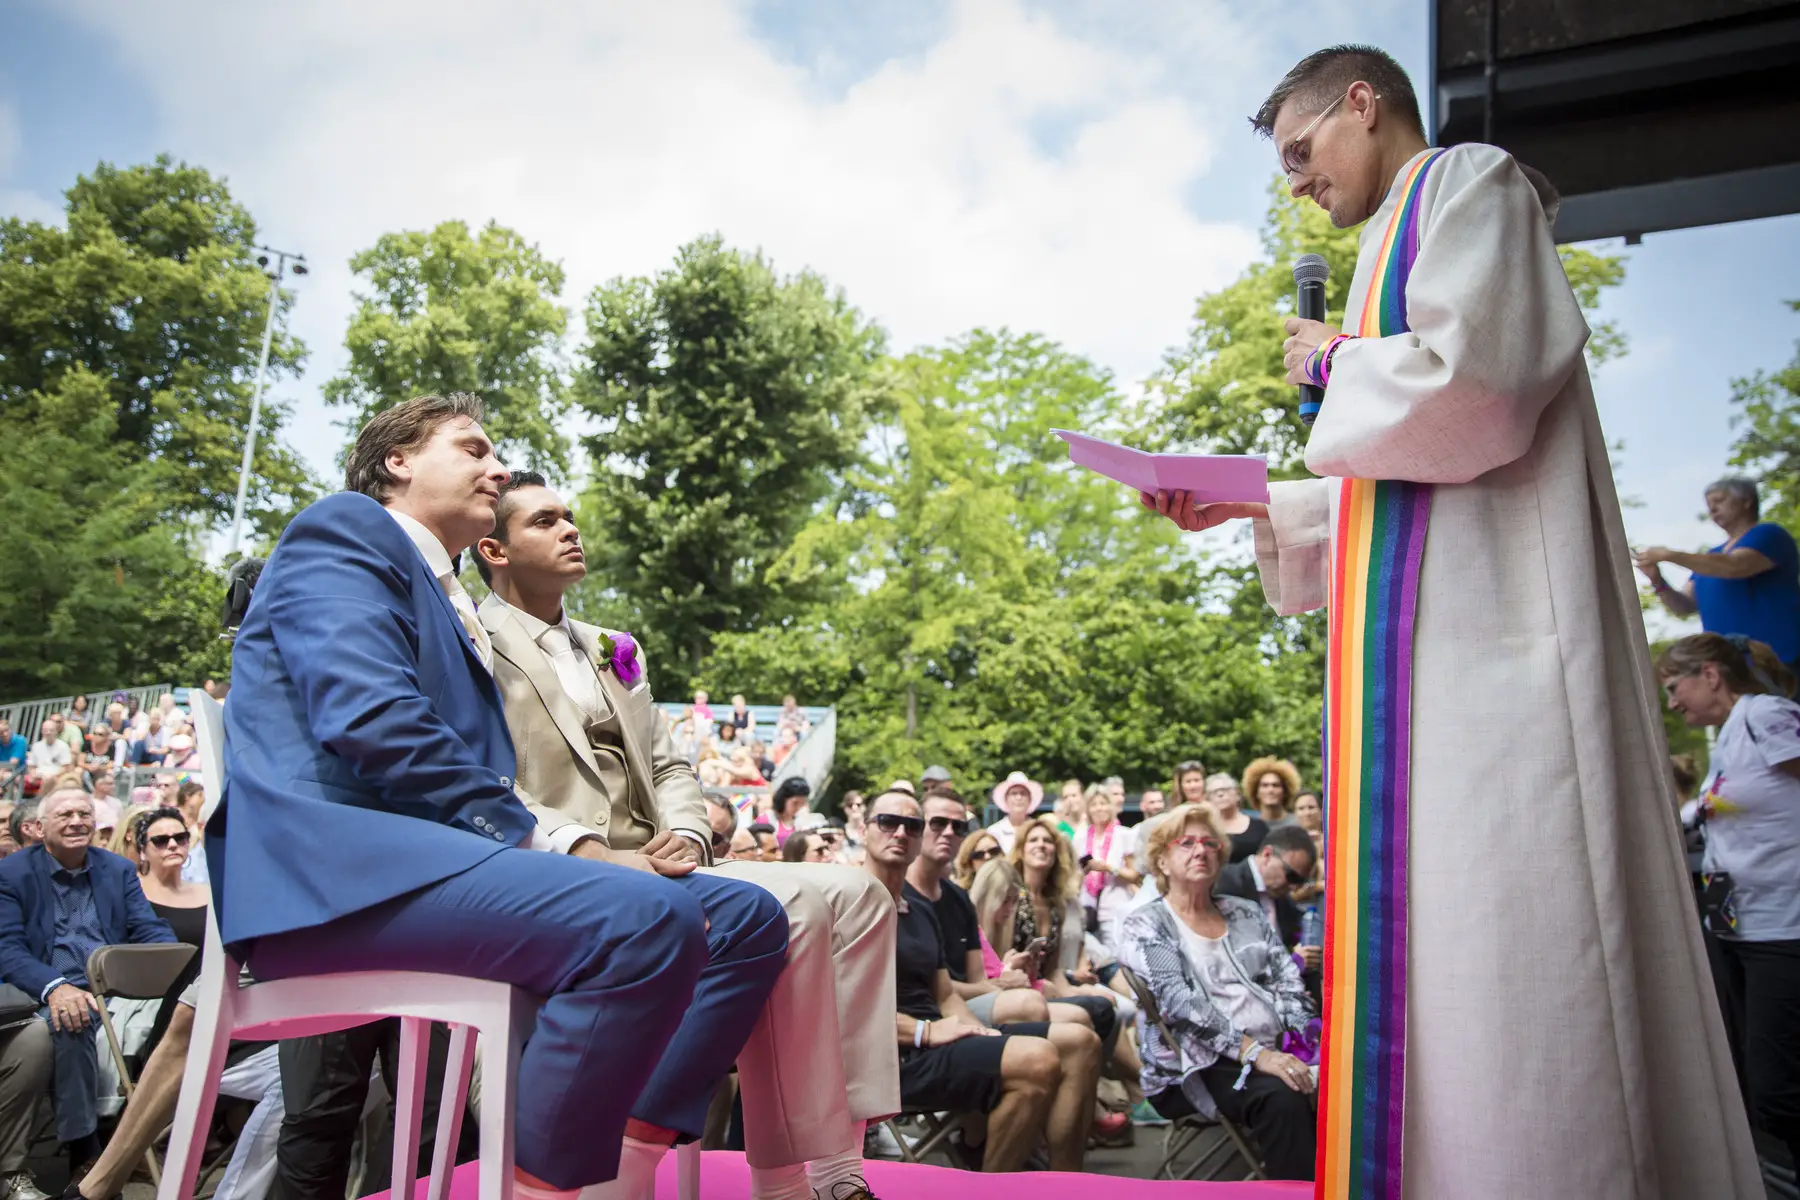 Wedding ceremony for a gay couple in Amsterdam